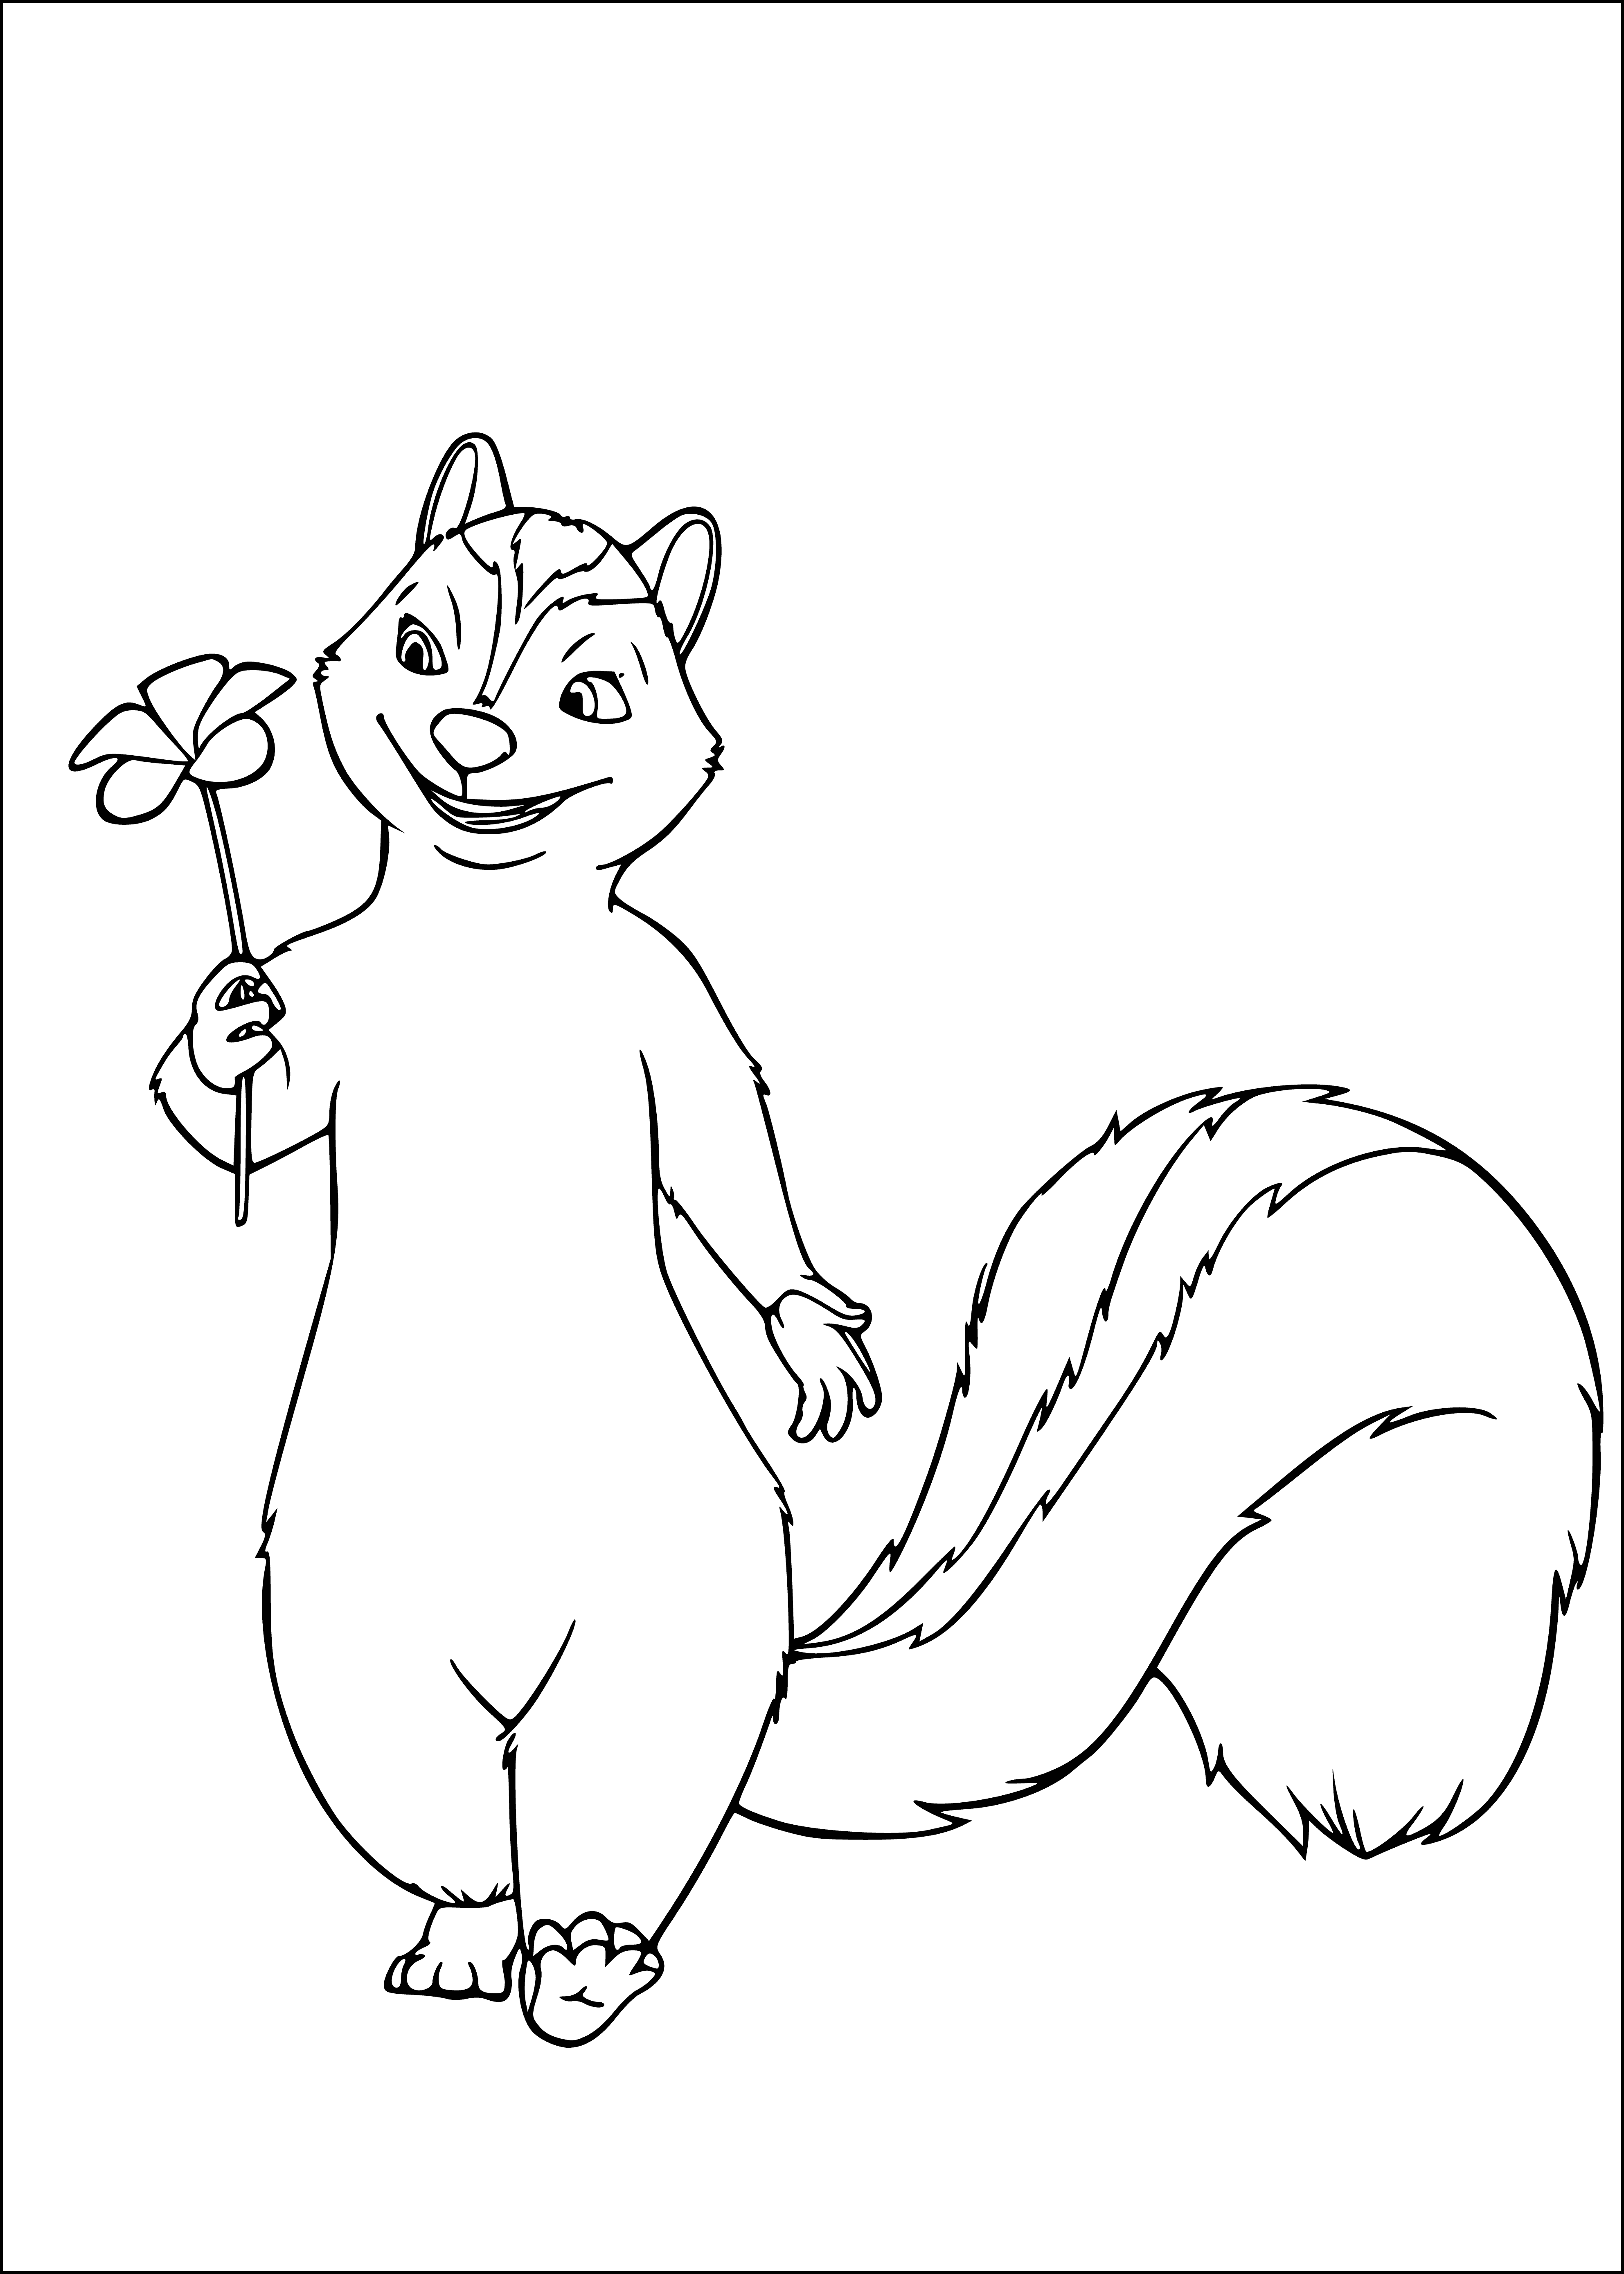 coloring page: Skunks are black and white, striped mammals with white stripe down their backs, black stripes, black face and legs, and small, black eyes.